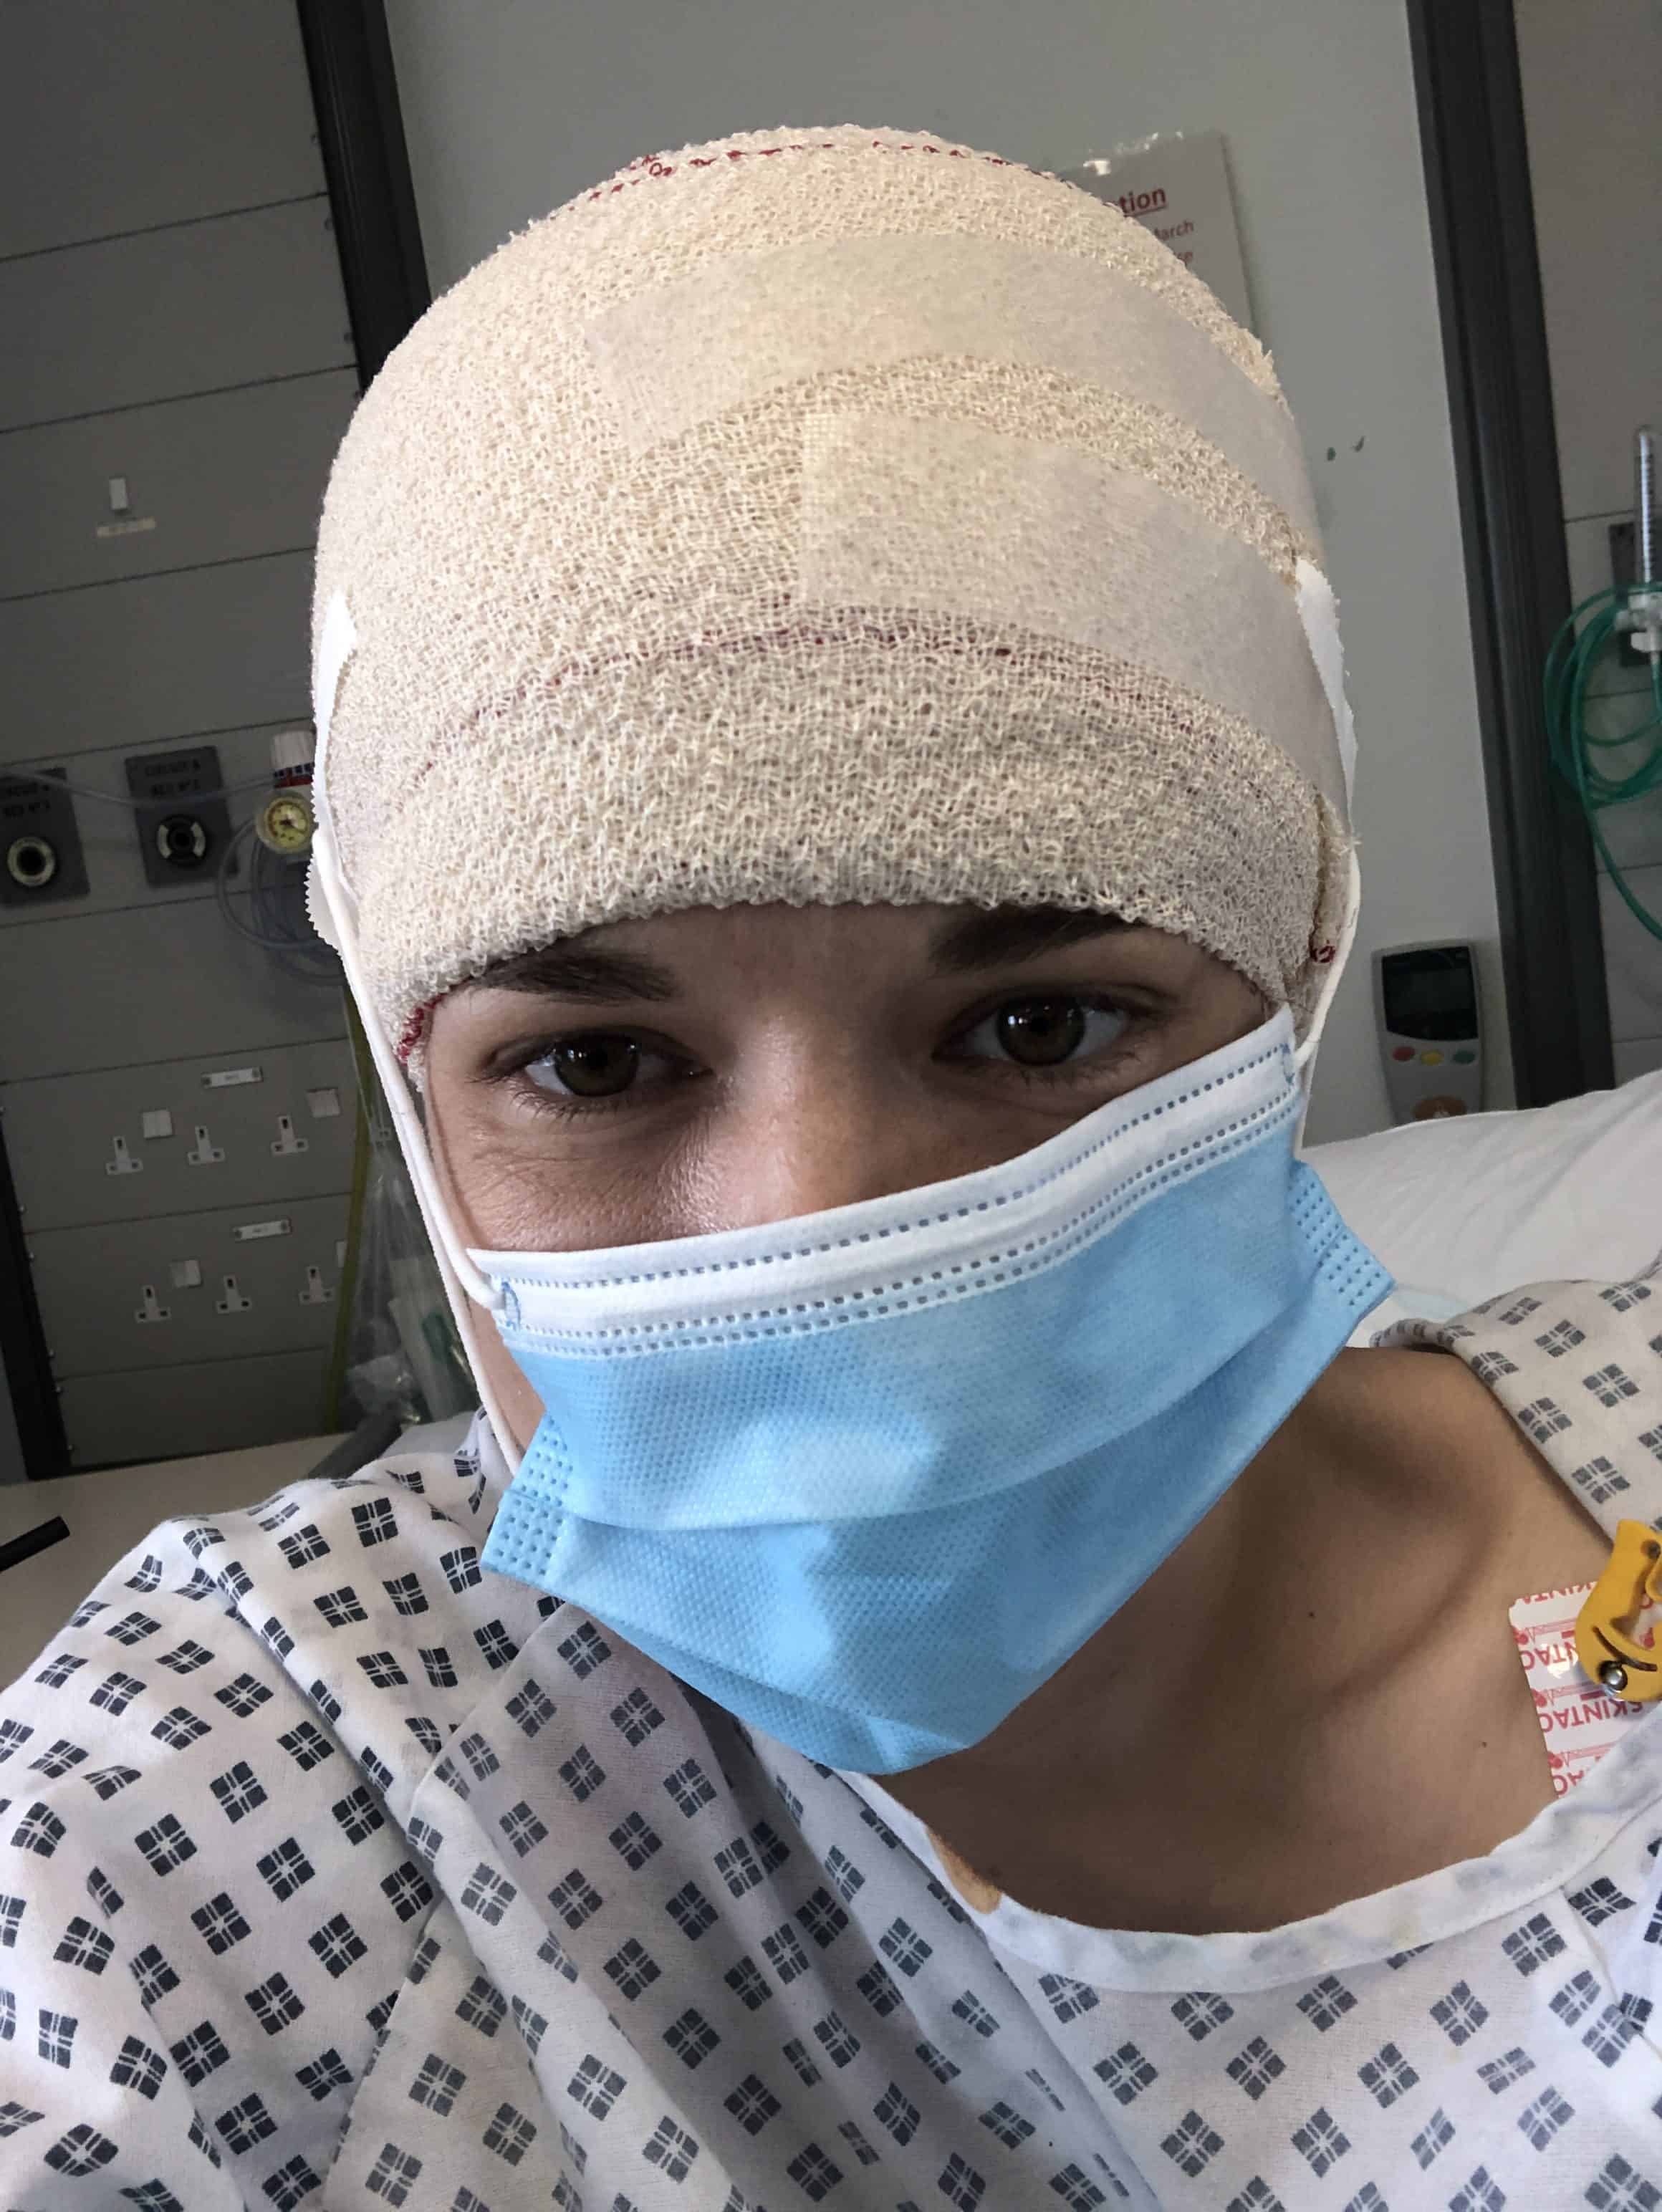 This is a photo of Lizzie who is living with brain cancer during the Covid-19 pandemic. Lizzie is on a hospital bed and the image is of her shoulders and head. She is wearing a hospital gown, blue face mask and has a bandage around the top of her head. She is looking at the camera.